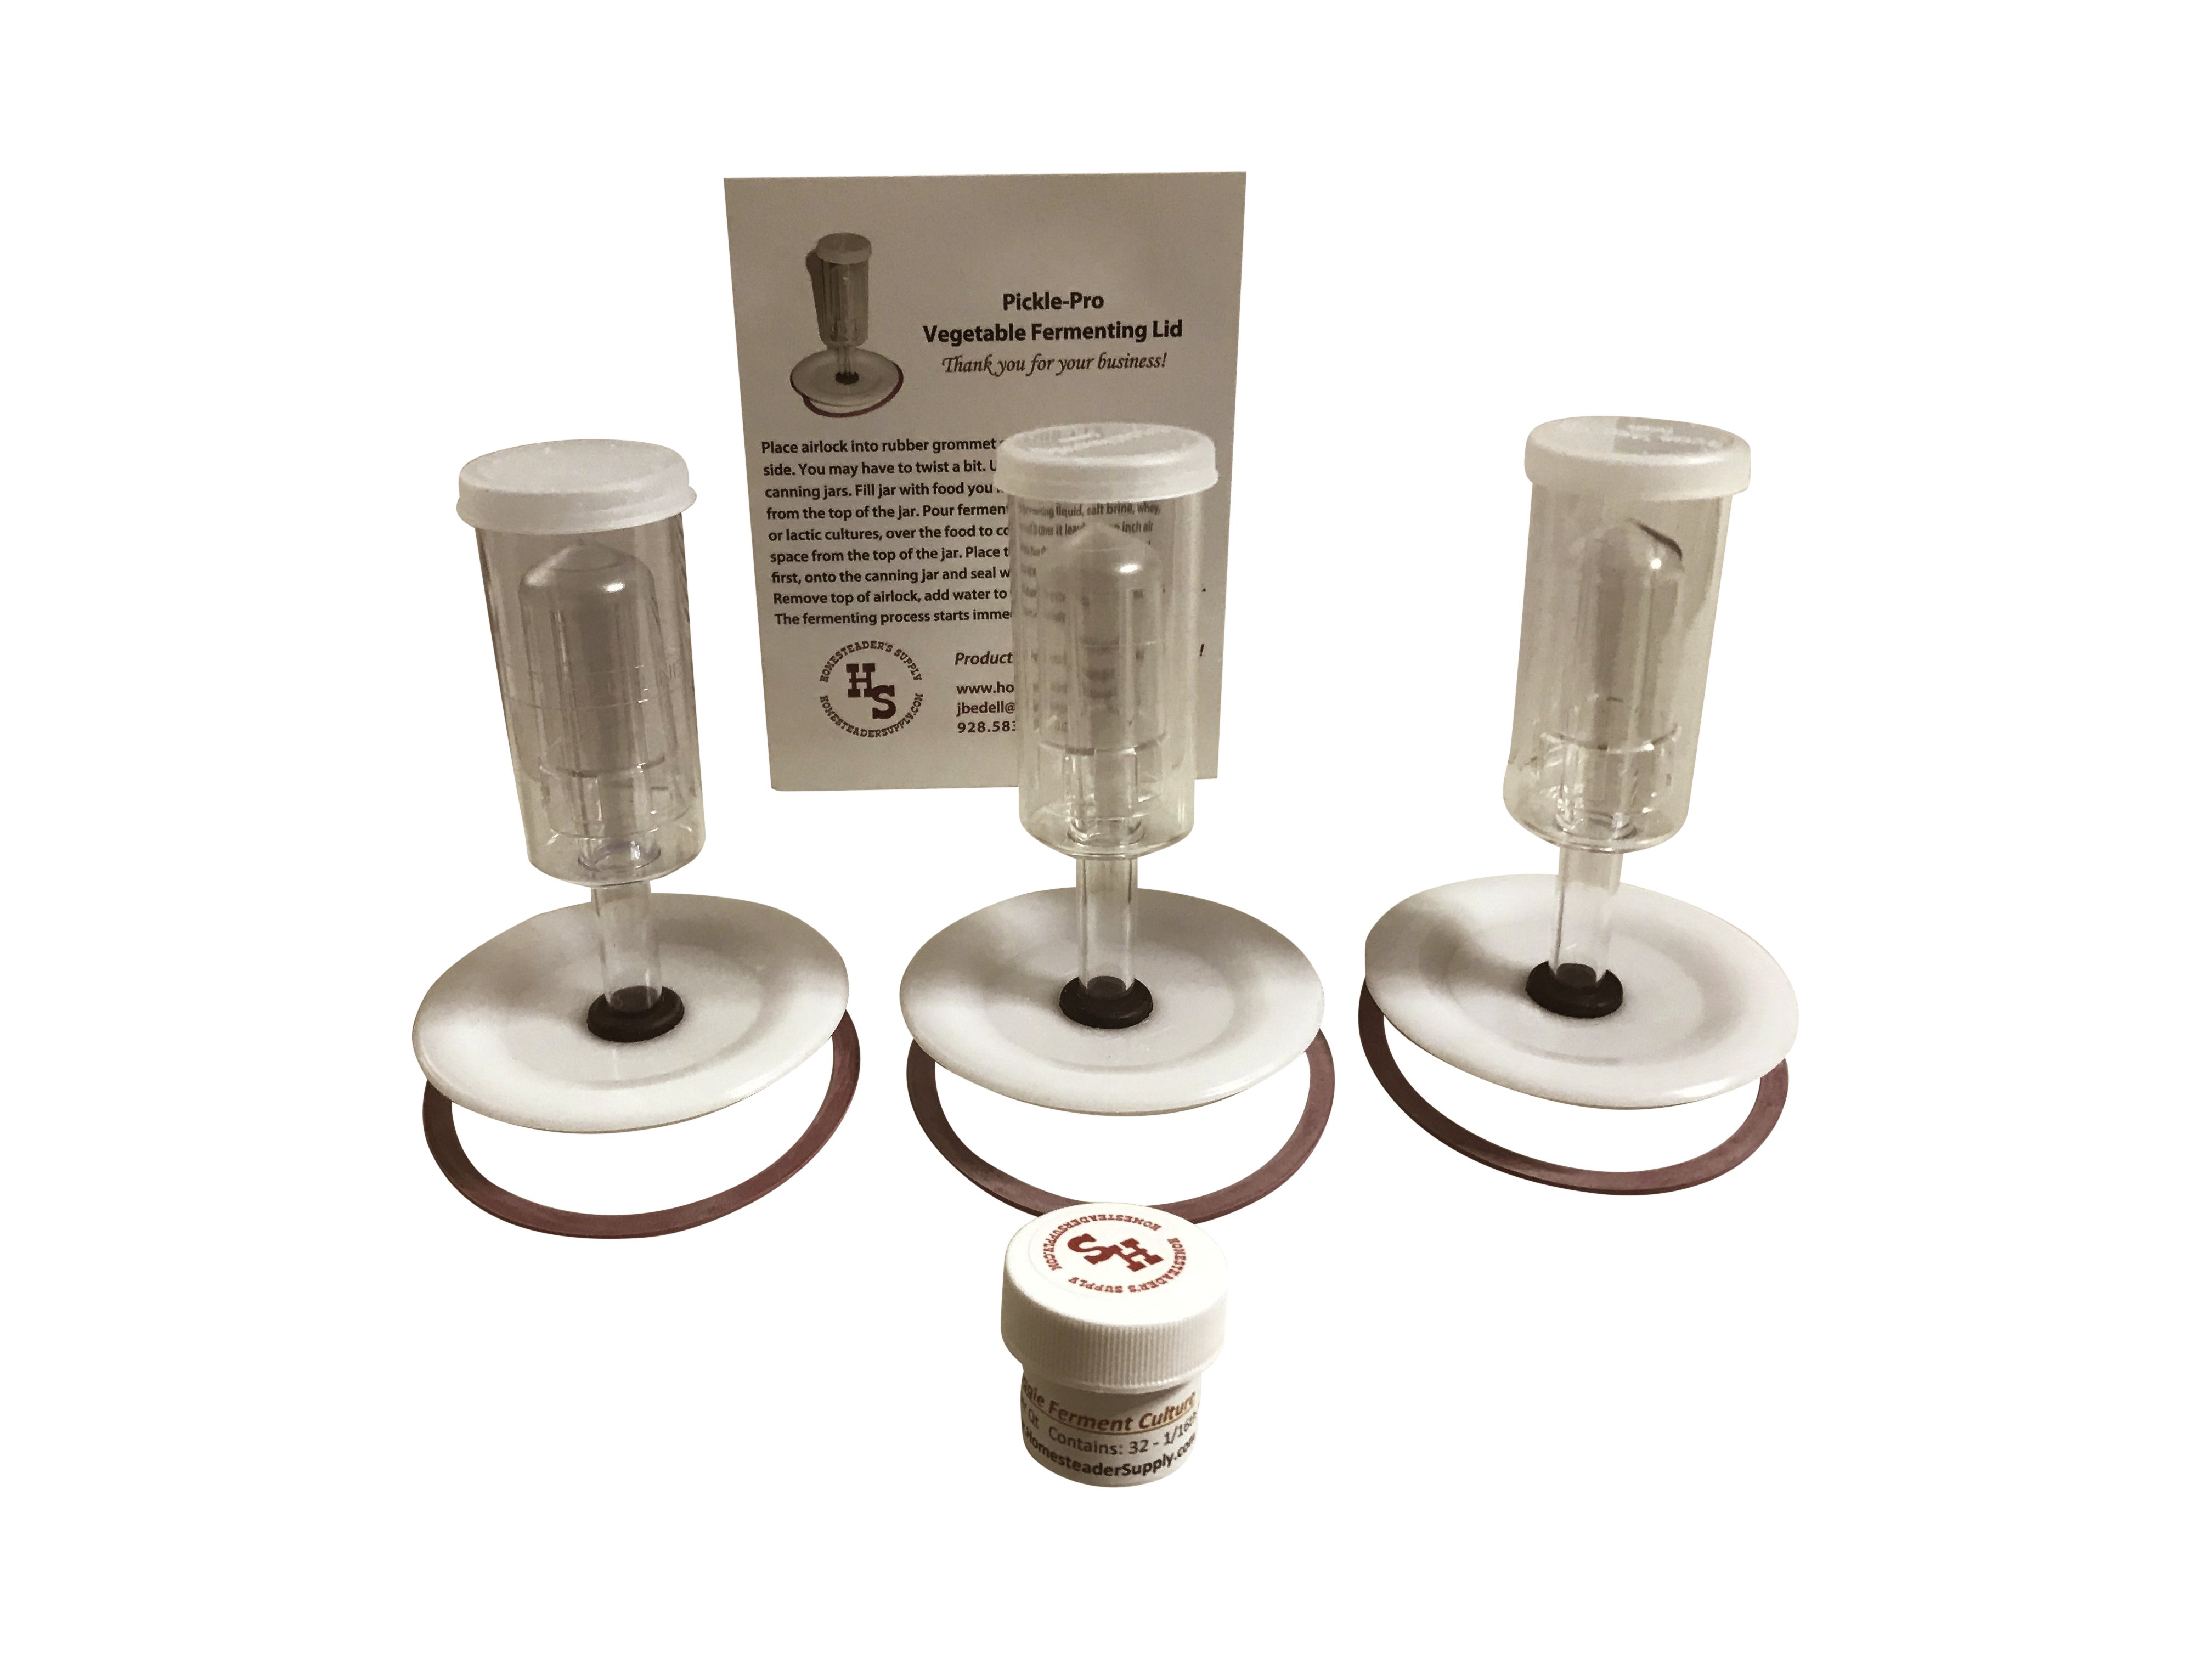 Pickle-Pro Fermenting Lid Set of 3 - Wide with Starter Culture